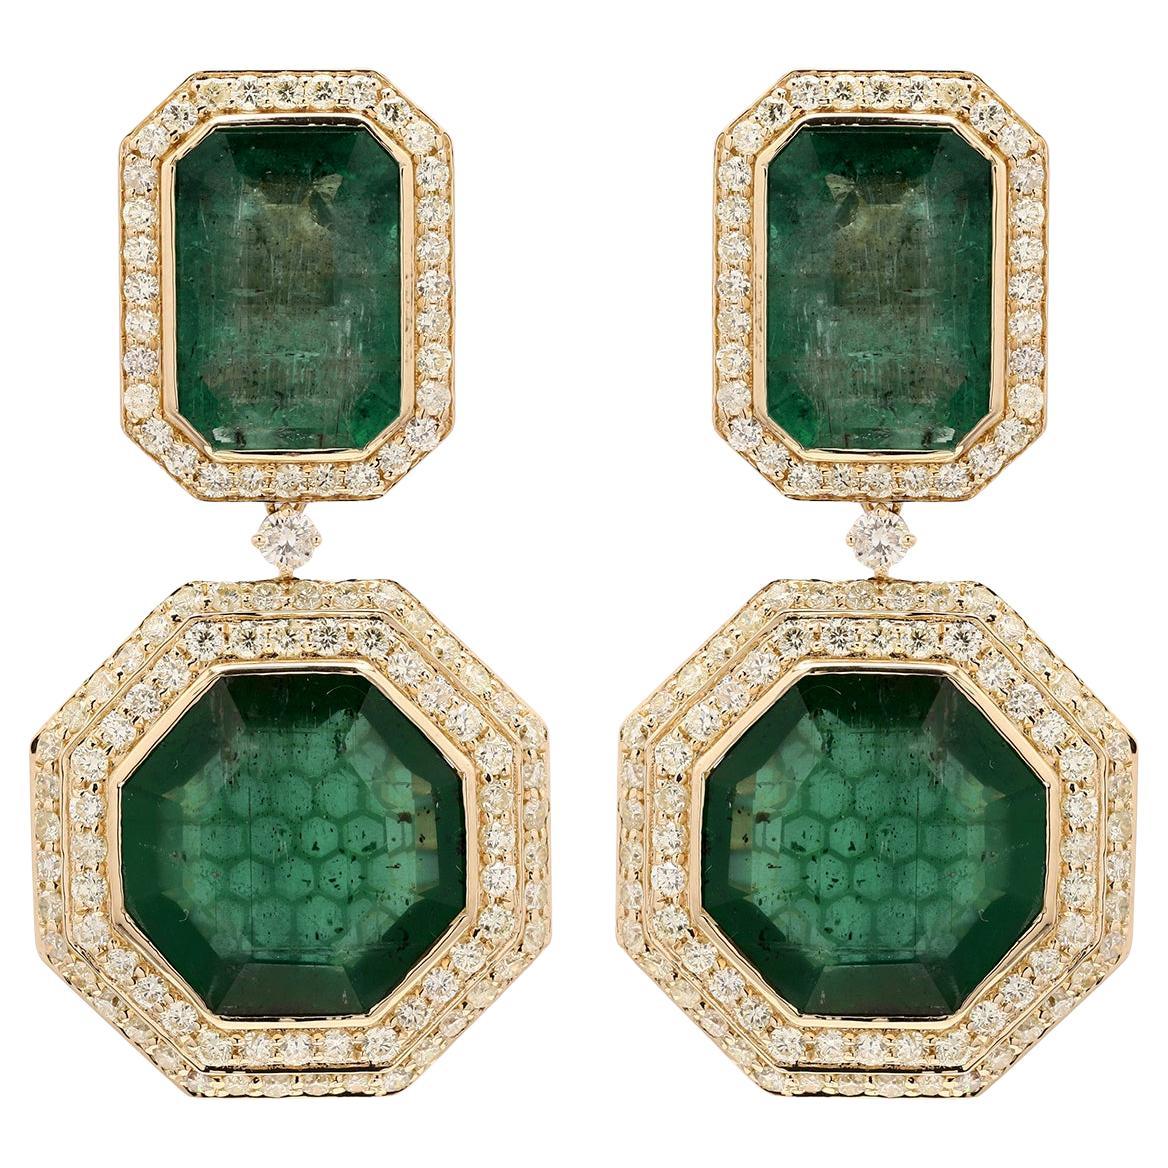 41.22 ct Two Tier Emerald Dangle Earrings With Diamonds Made in 18k Yellow Gold